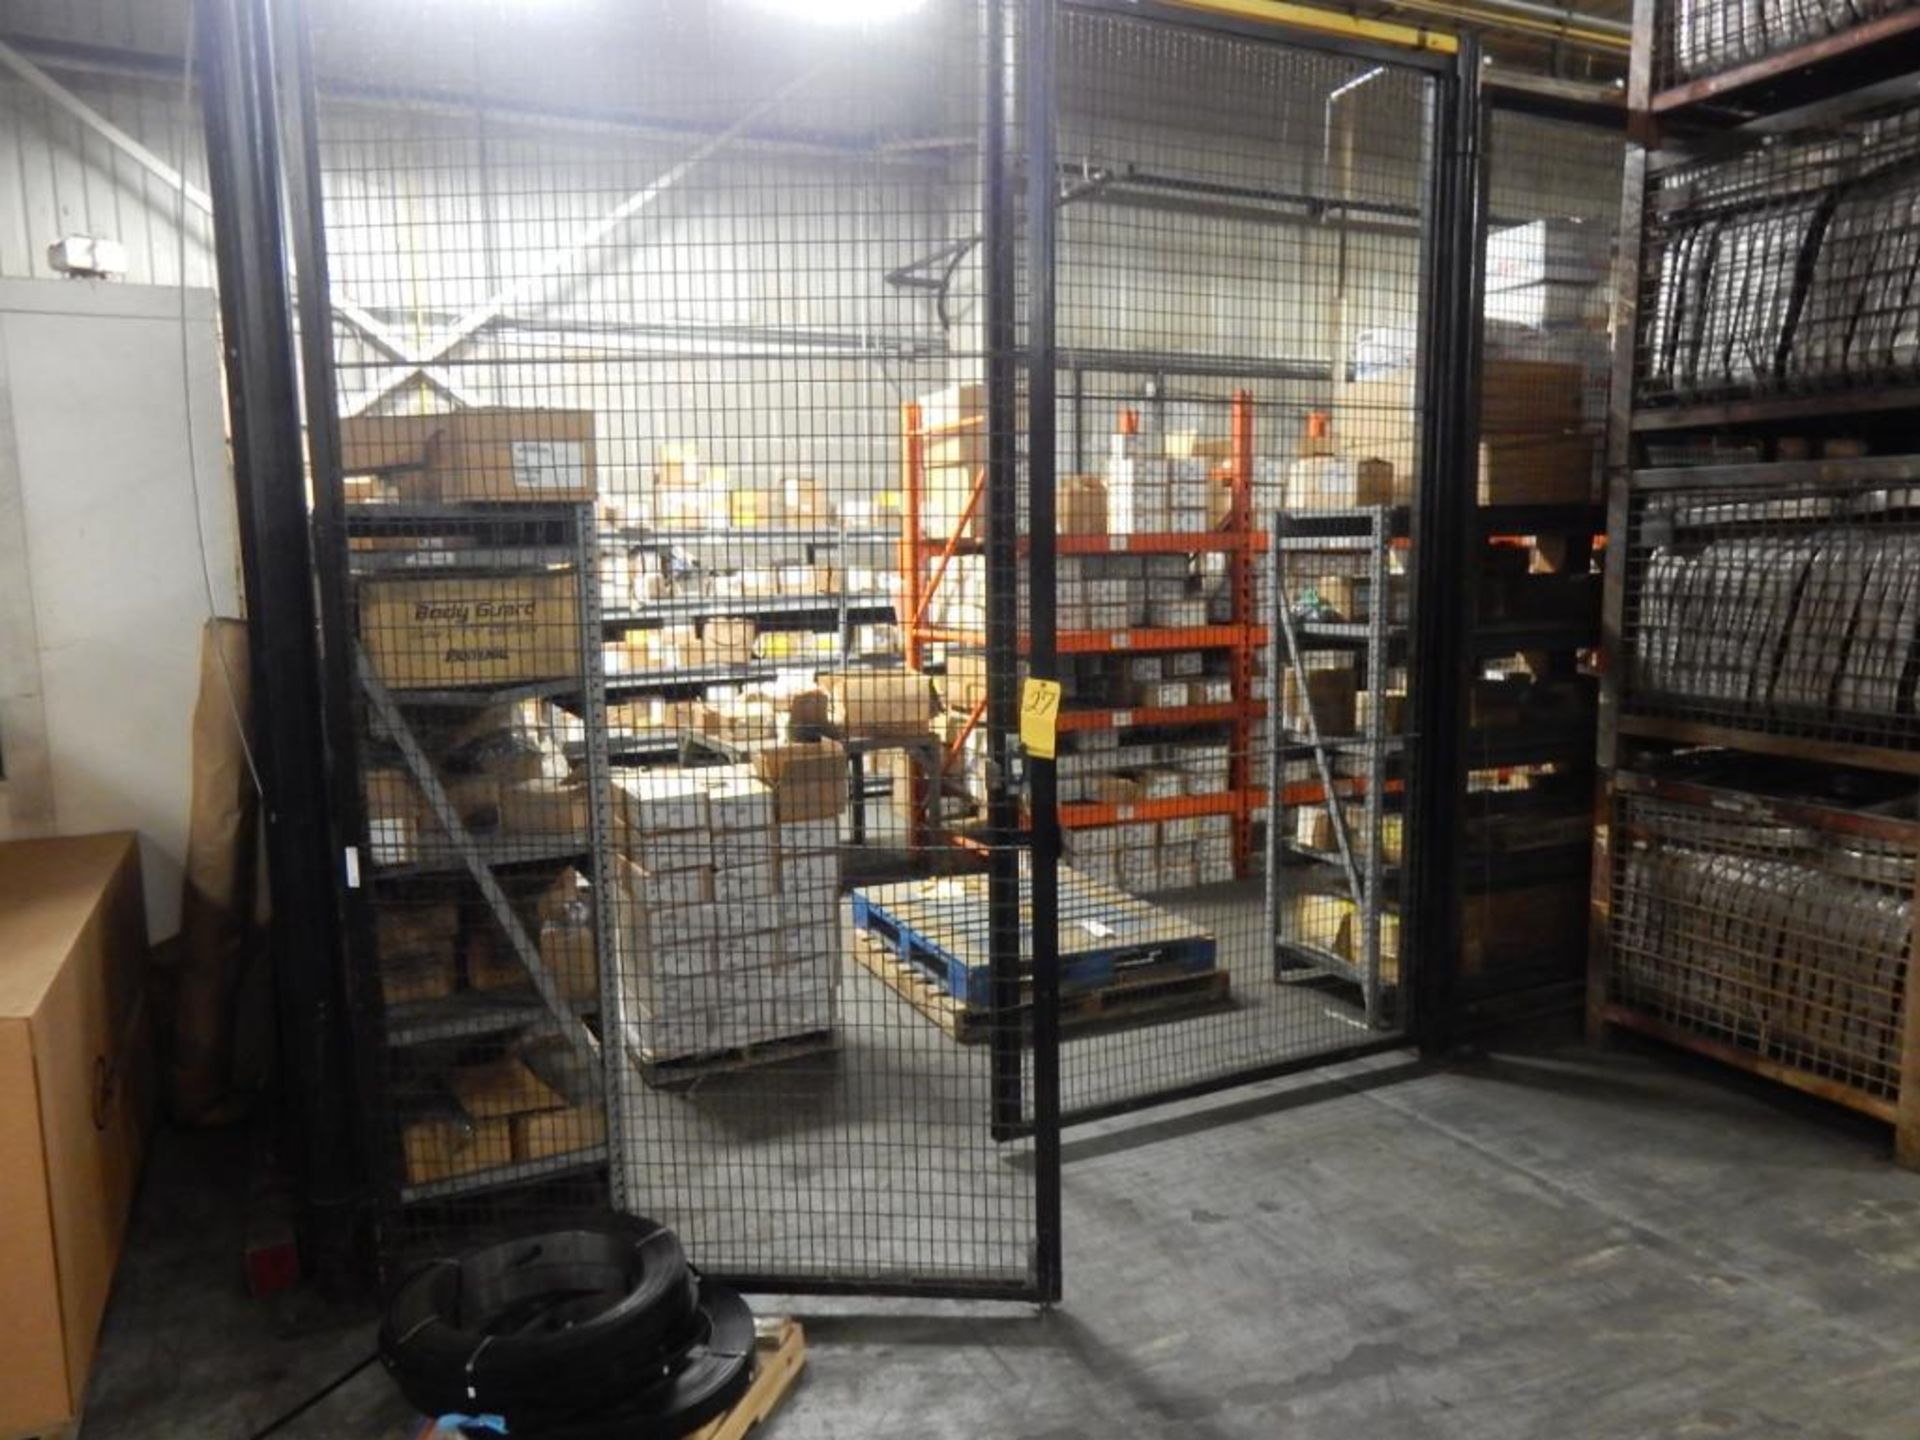 PARTS CAGE W/CONTENTS - APPROX. 9' TALL X 50' WIRE CLOTH WALLS, SINGLE DOUBLE-OPEN DOOR W/CONTENTS -